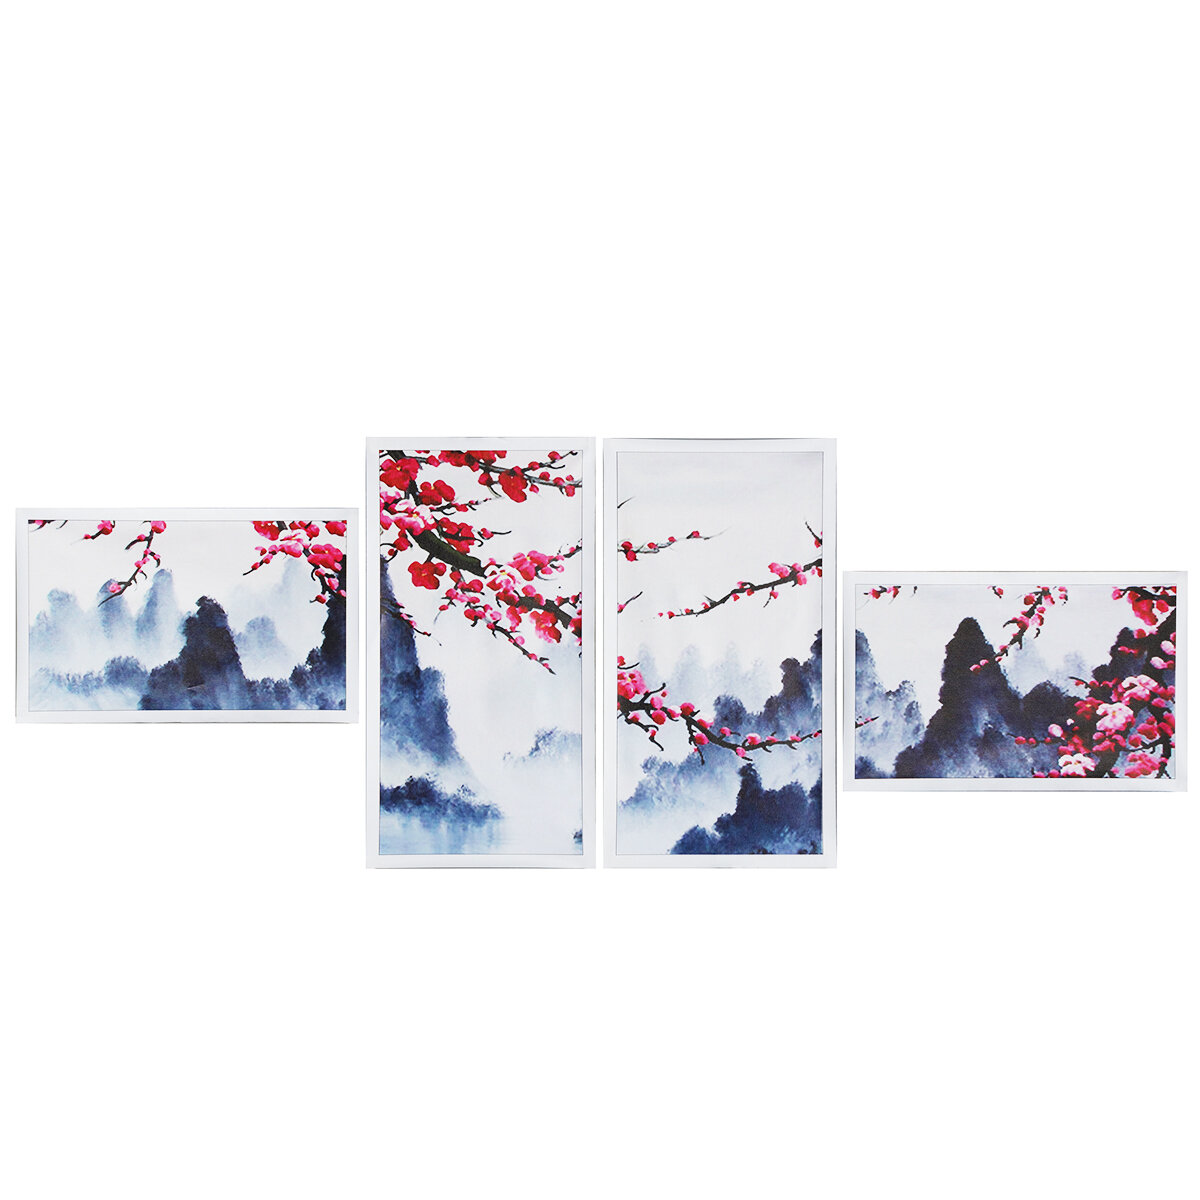 4 Pcs Wall Decorative Painting Modern Abstract Wall Decor Plum Blossom Art Pictures Canvas Prints Home Office Decoration